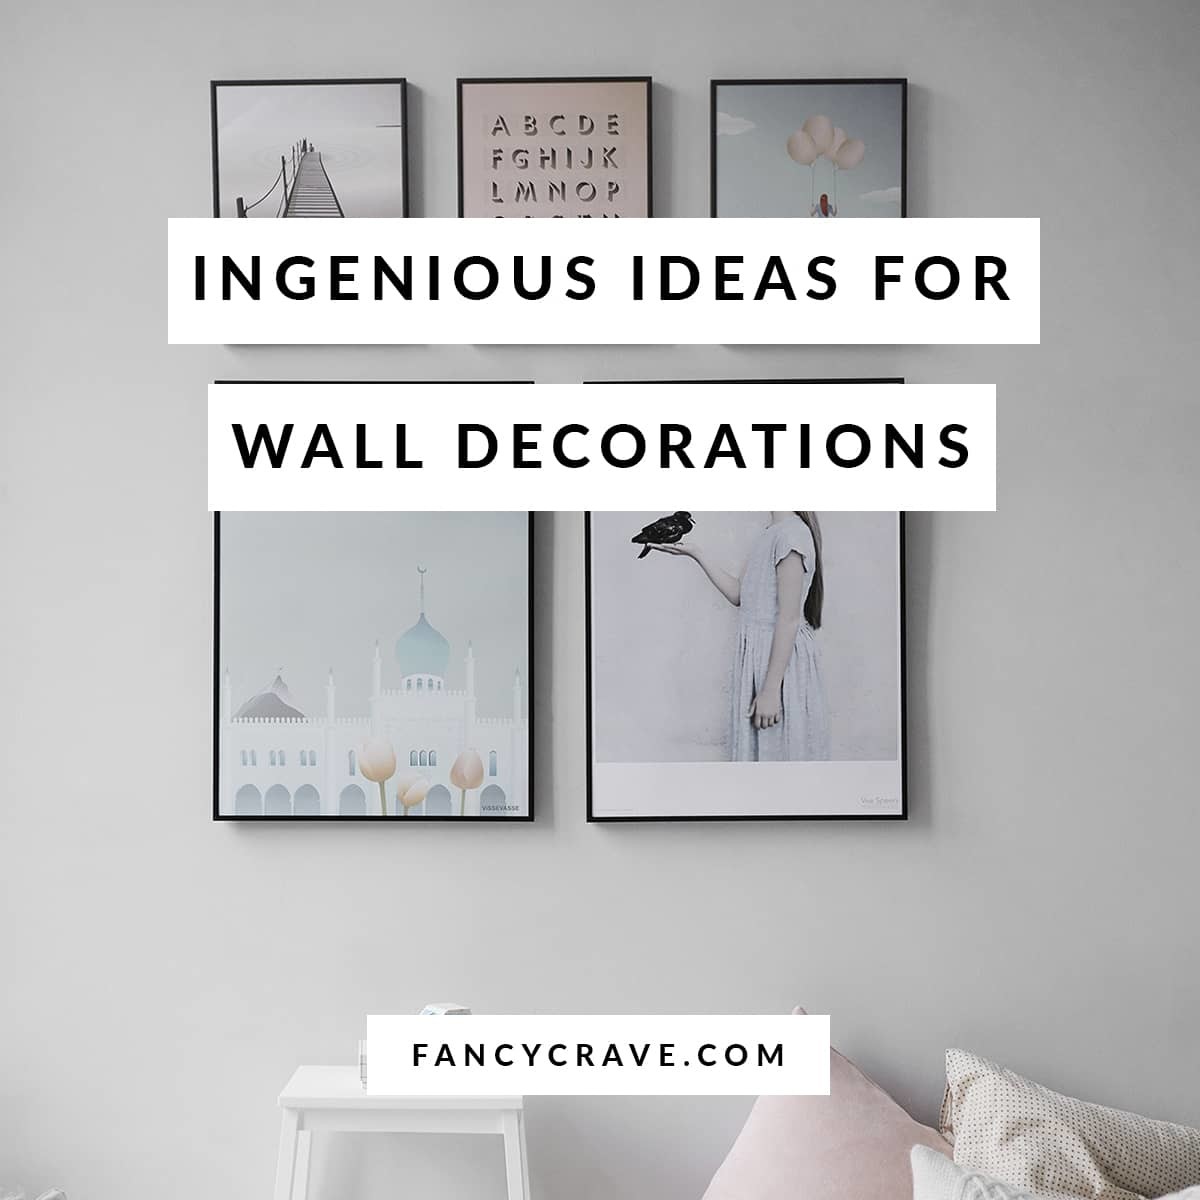 Ingenious Ideas for Wall Decorations